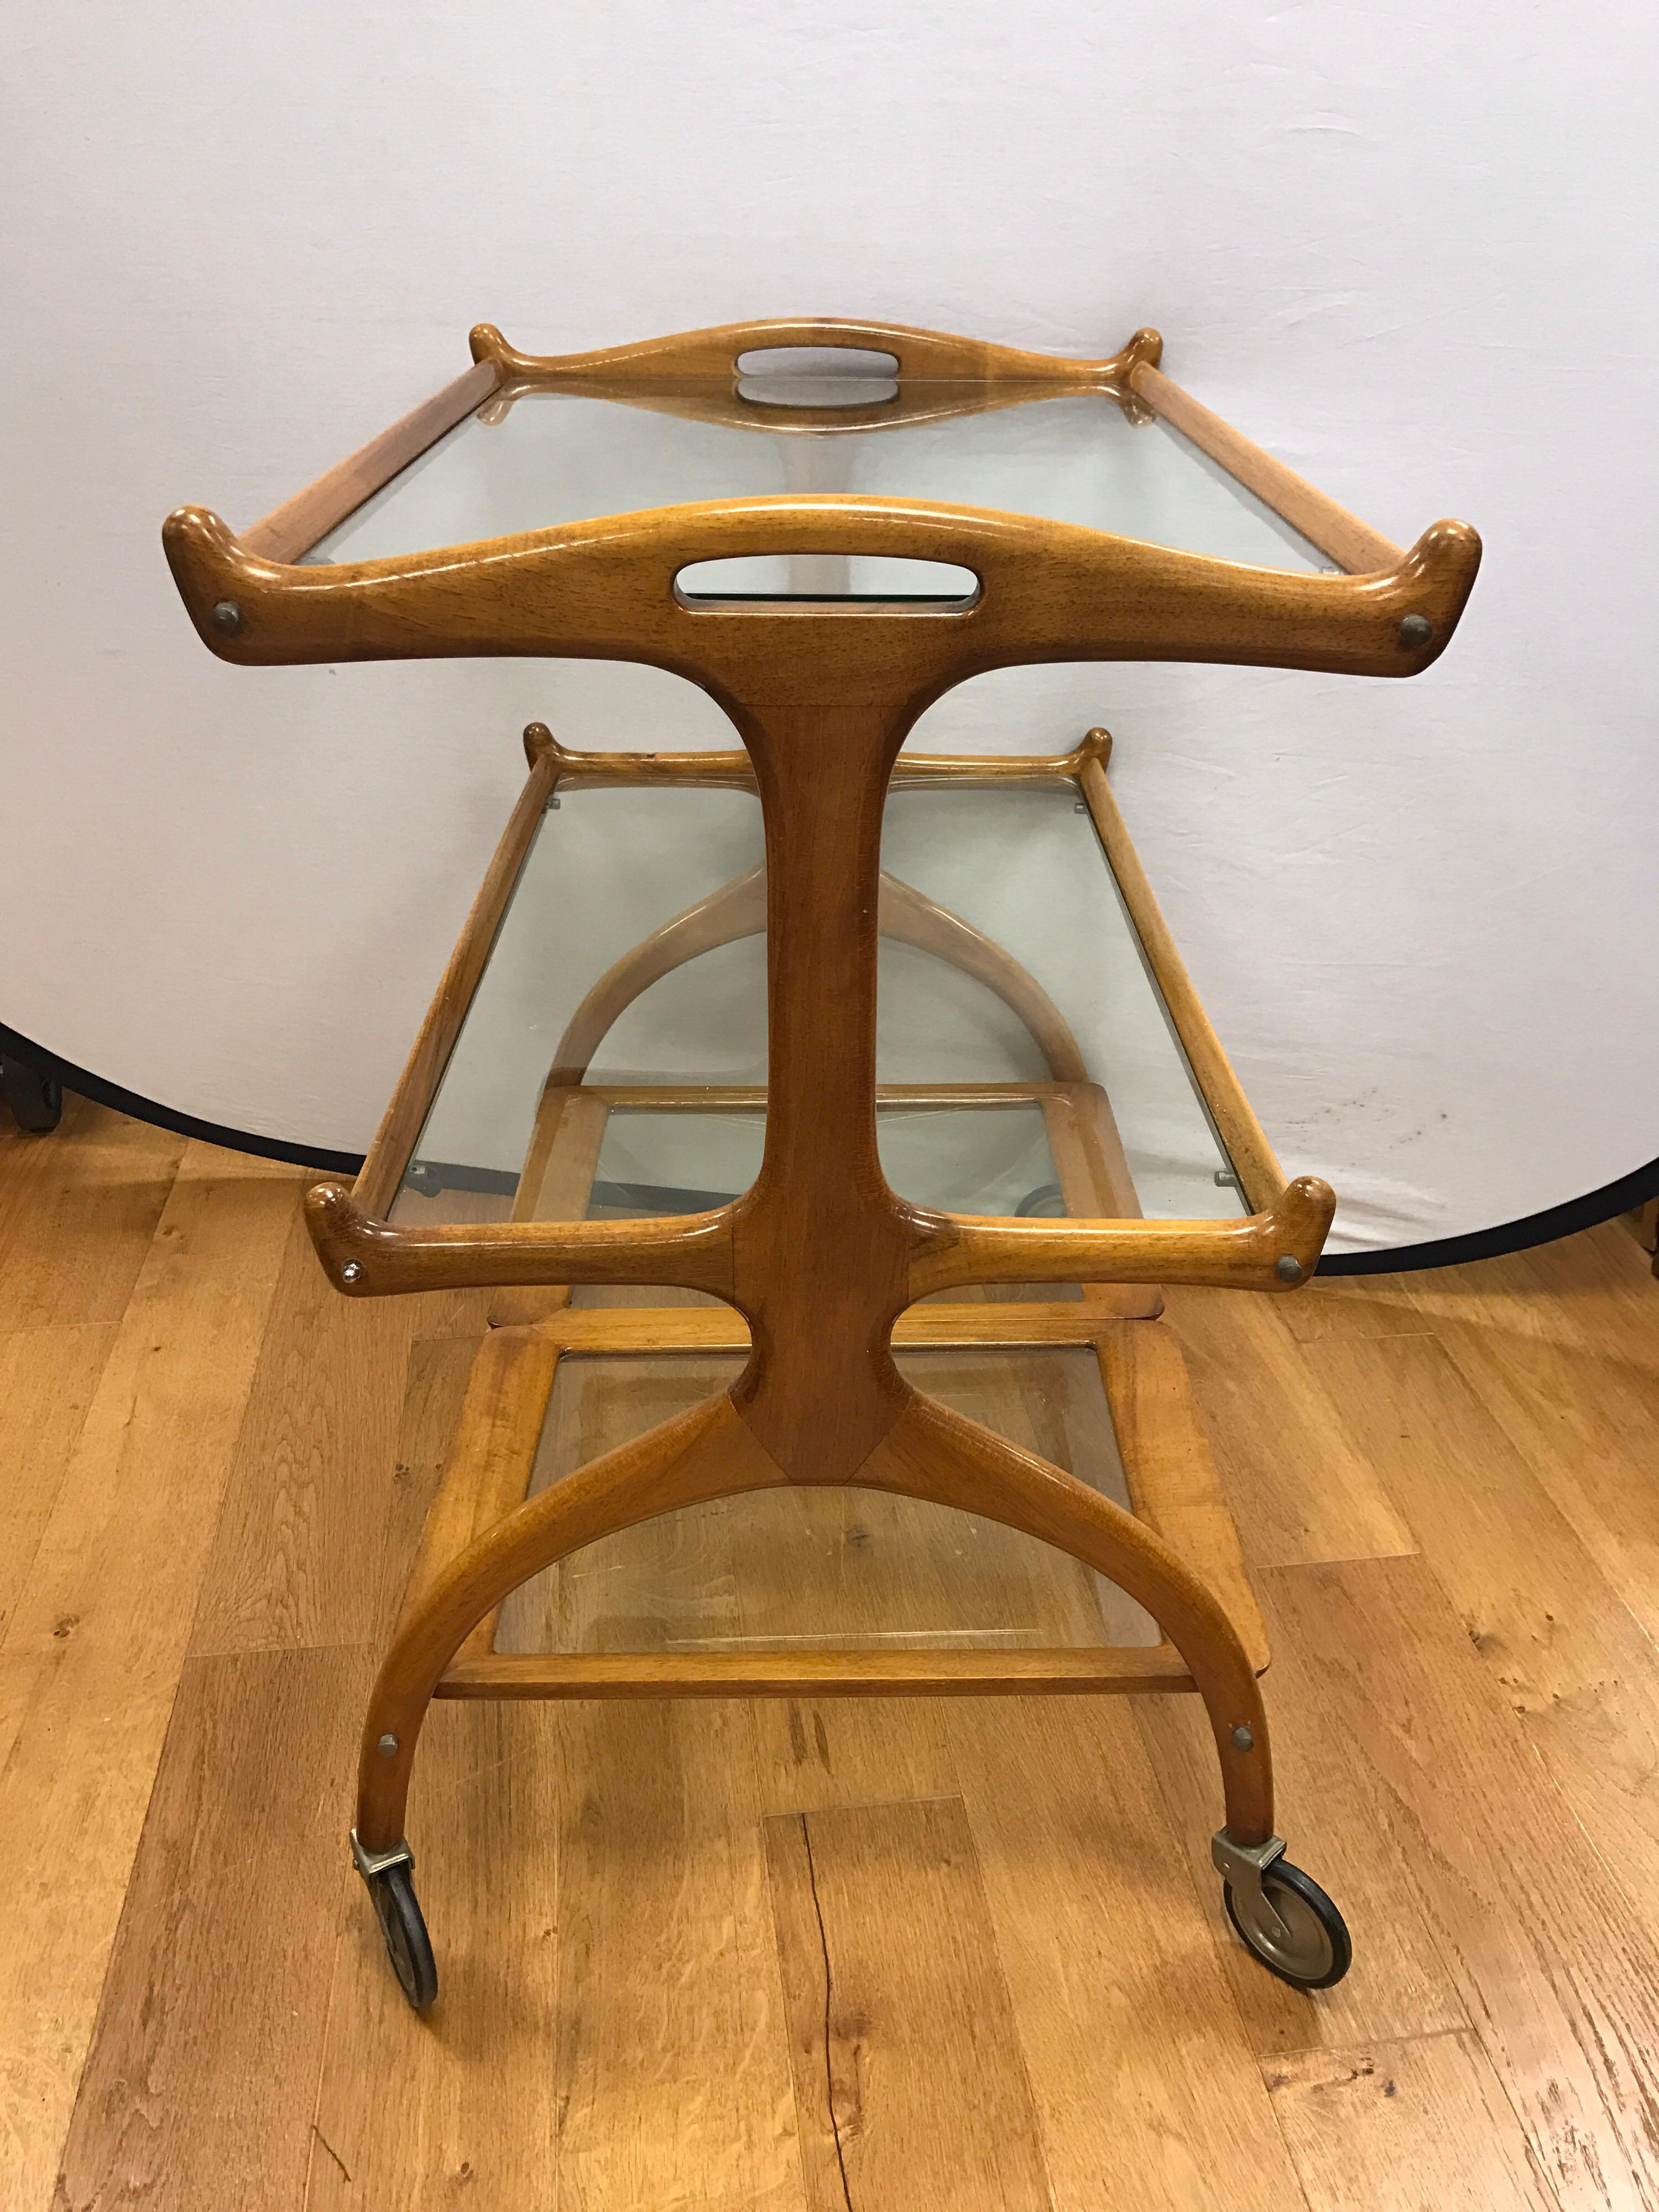 Rare three-tiered rolling bar cart from Brazil, circa early 1960s, made of Jacaranda wood. Bottom tier has two removable glass trays.